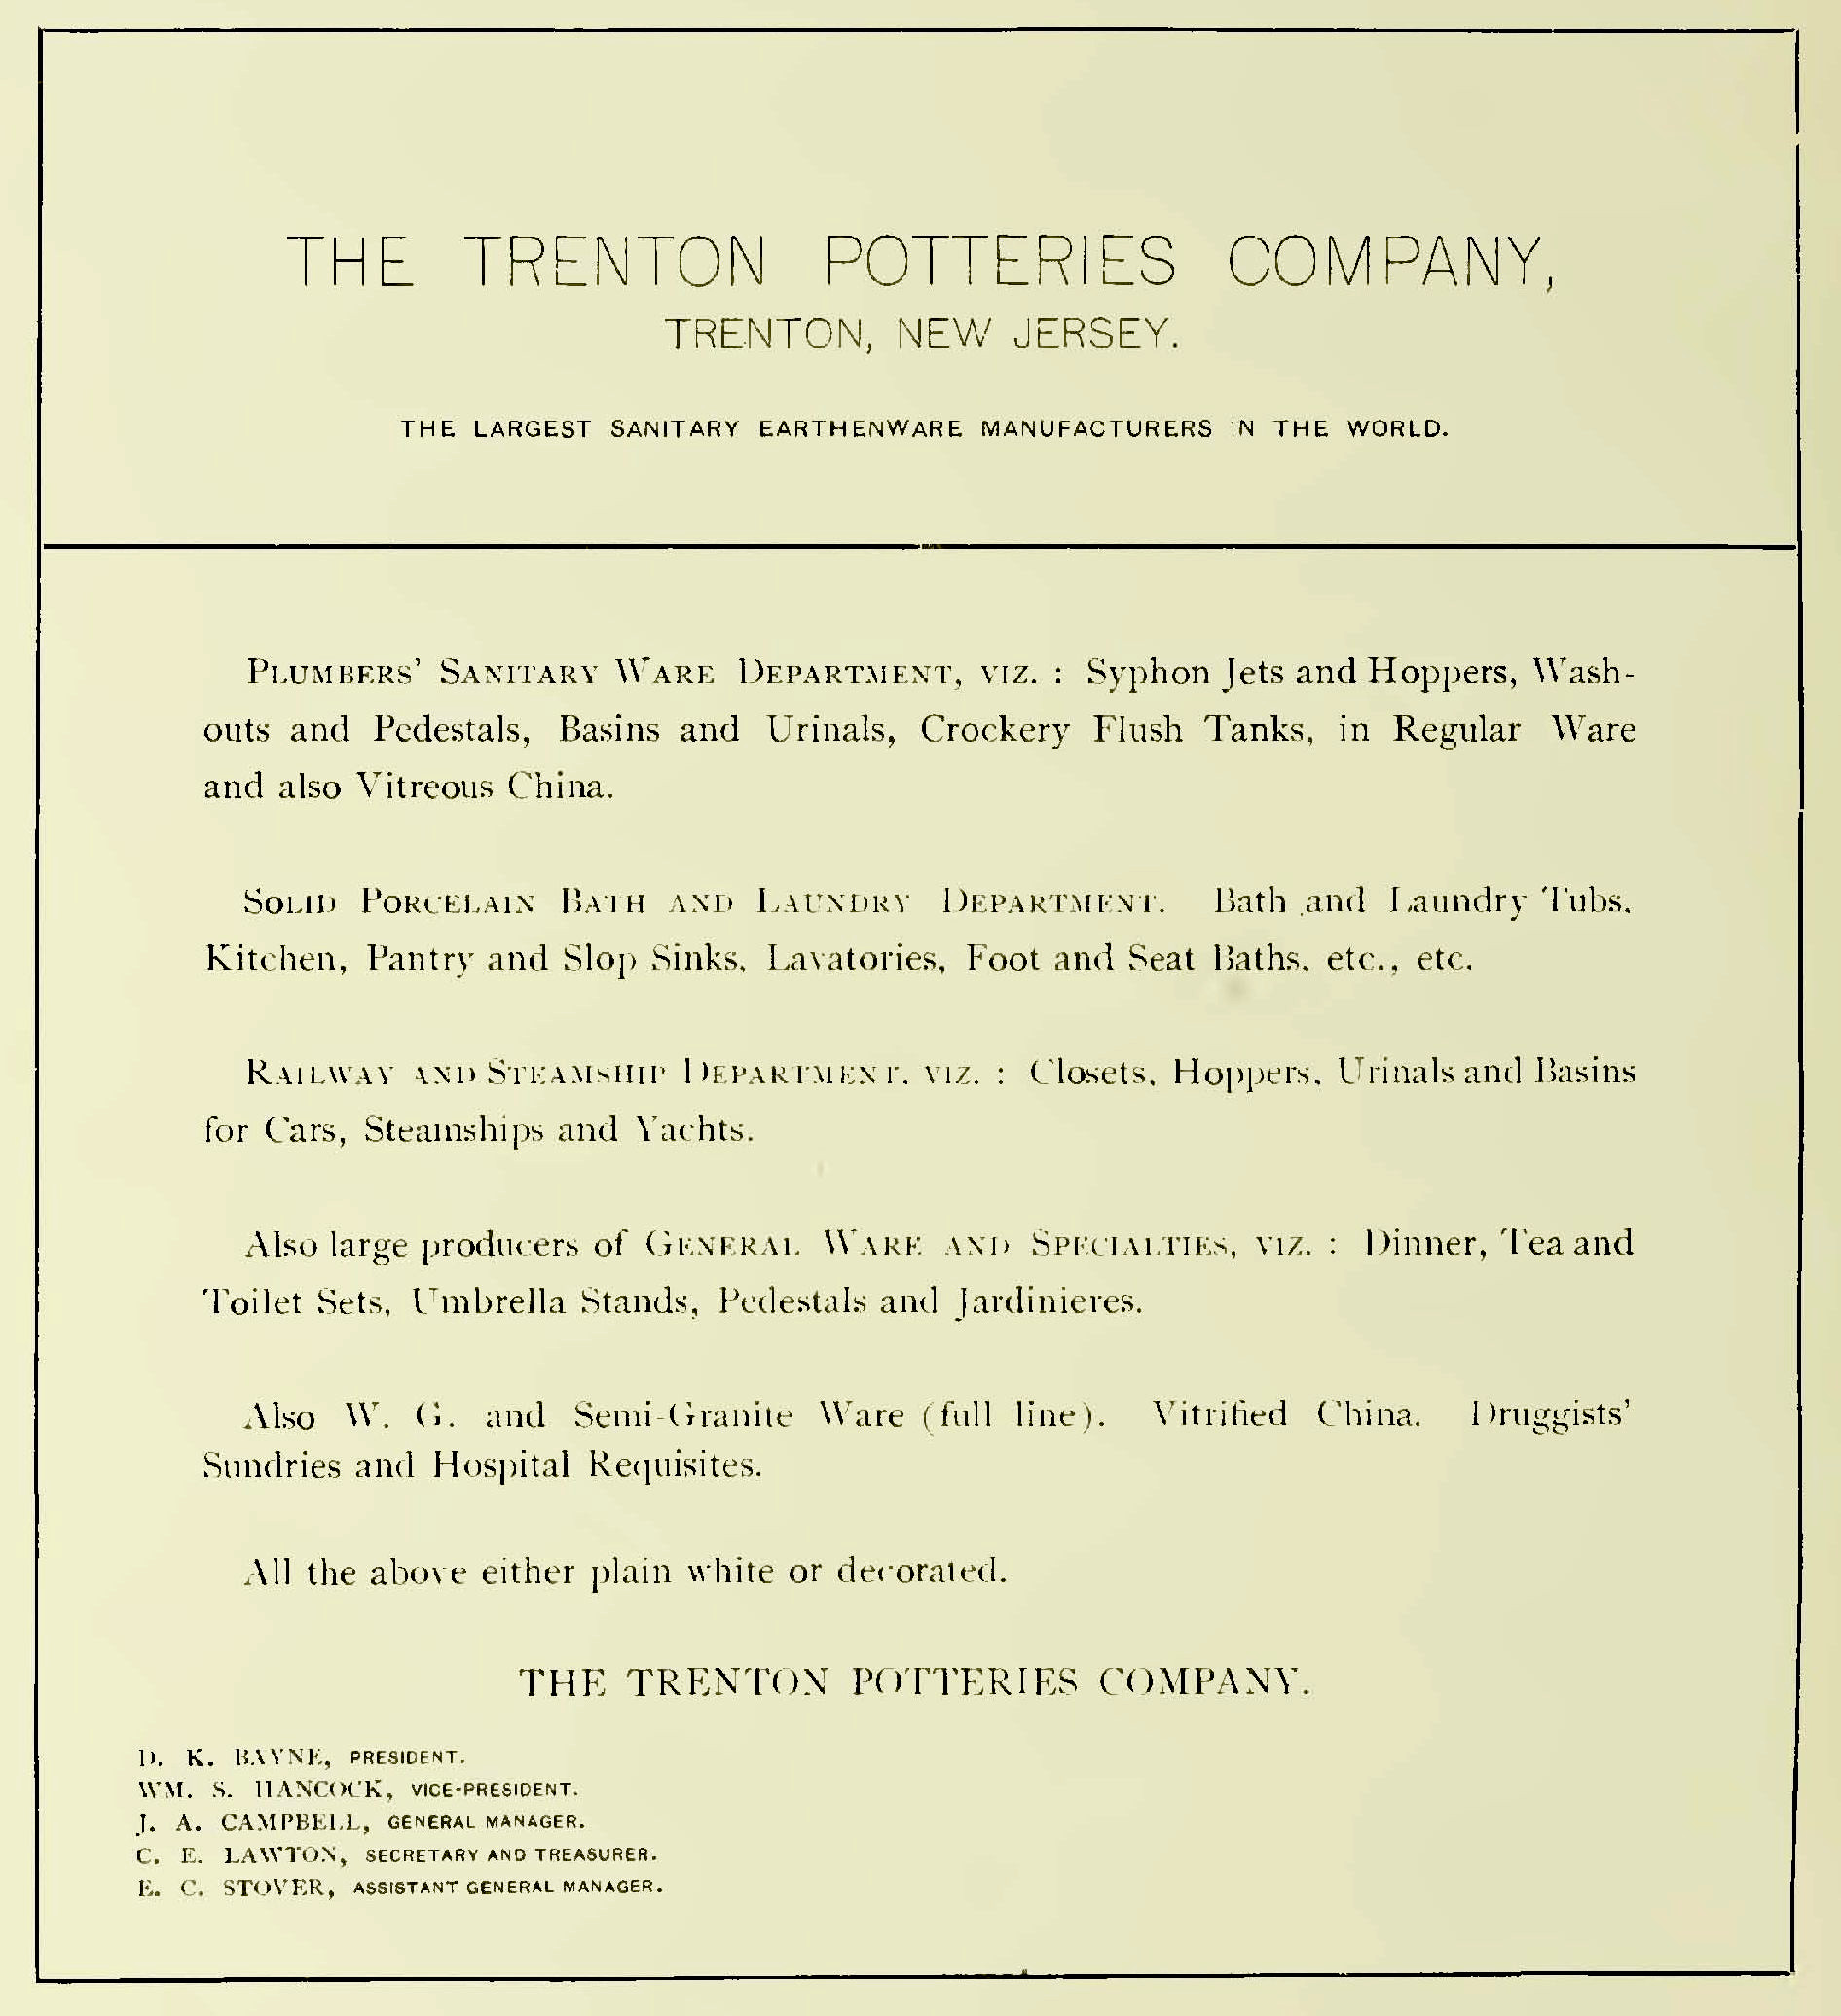 Trenton Potteries Company advertisement listing the different products they manufactured.  Trenton Board of Trade, Industrial Trenton and Vicinity. 1900